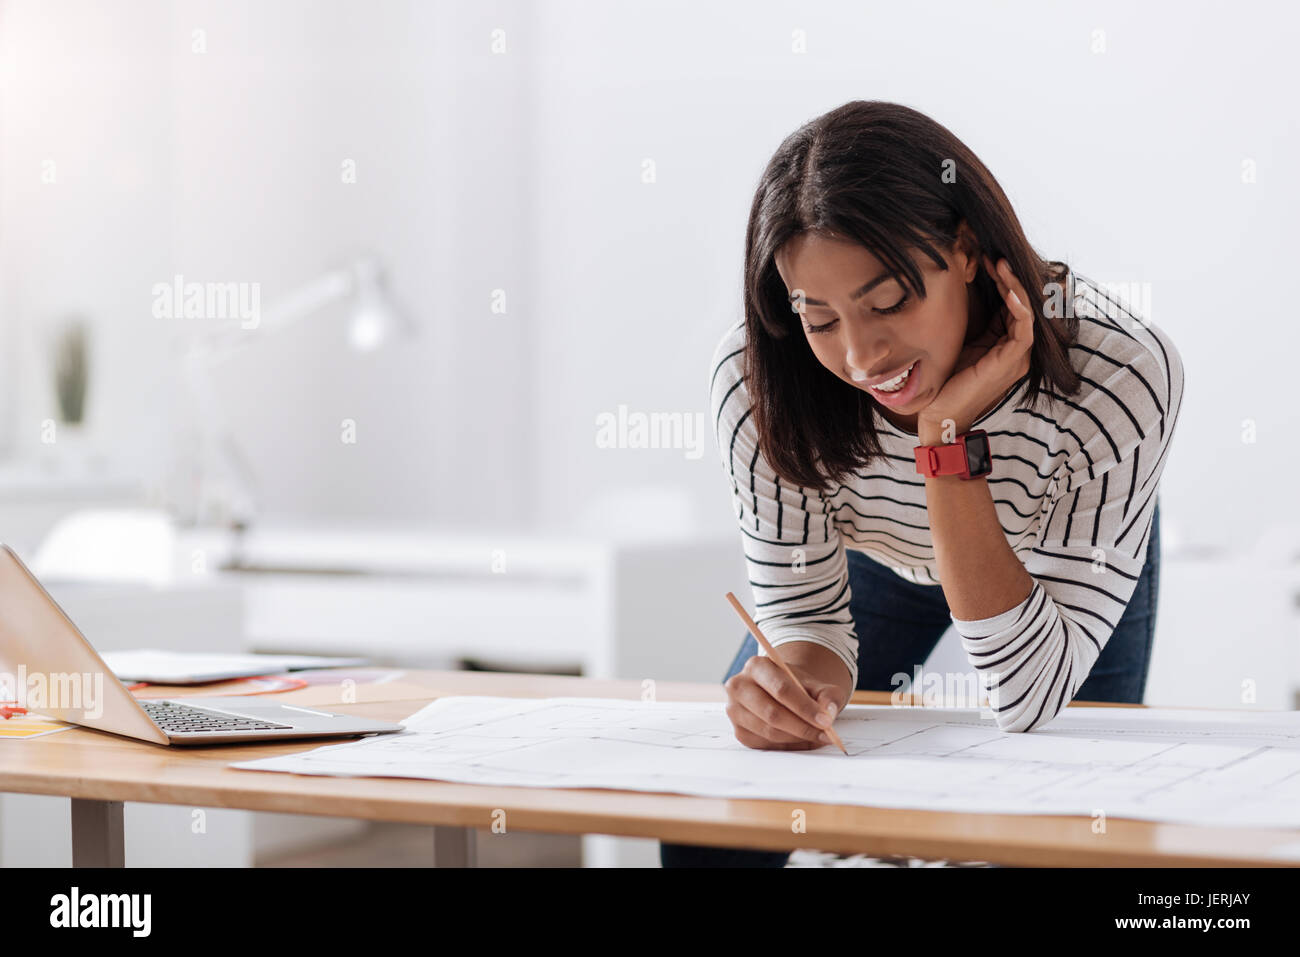 Hard working smart woman concentrating on her project Stock Photo